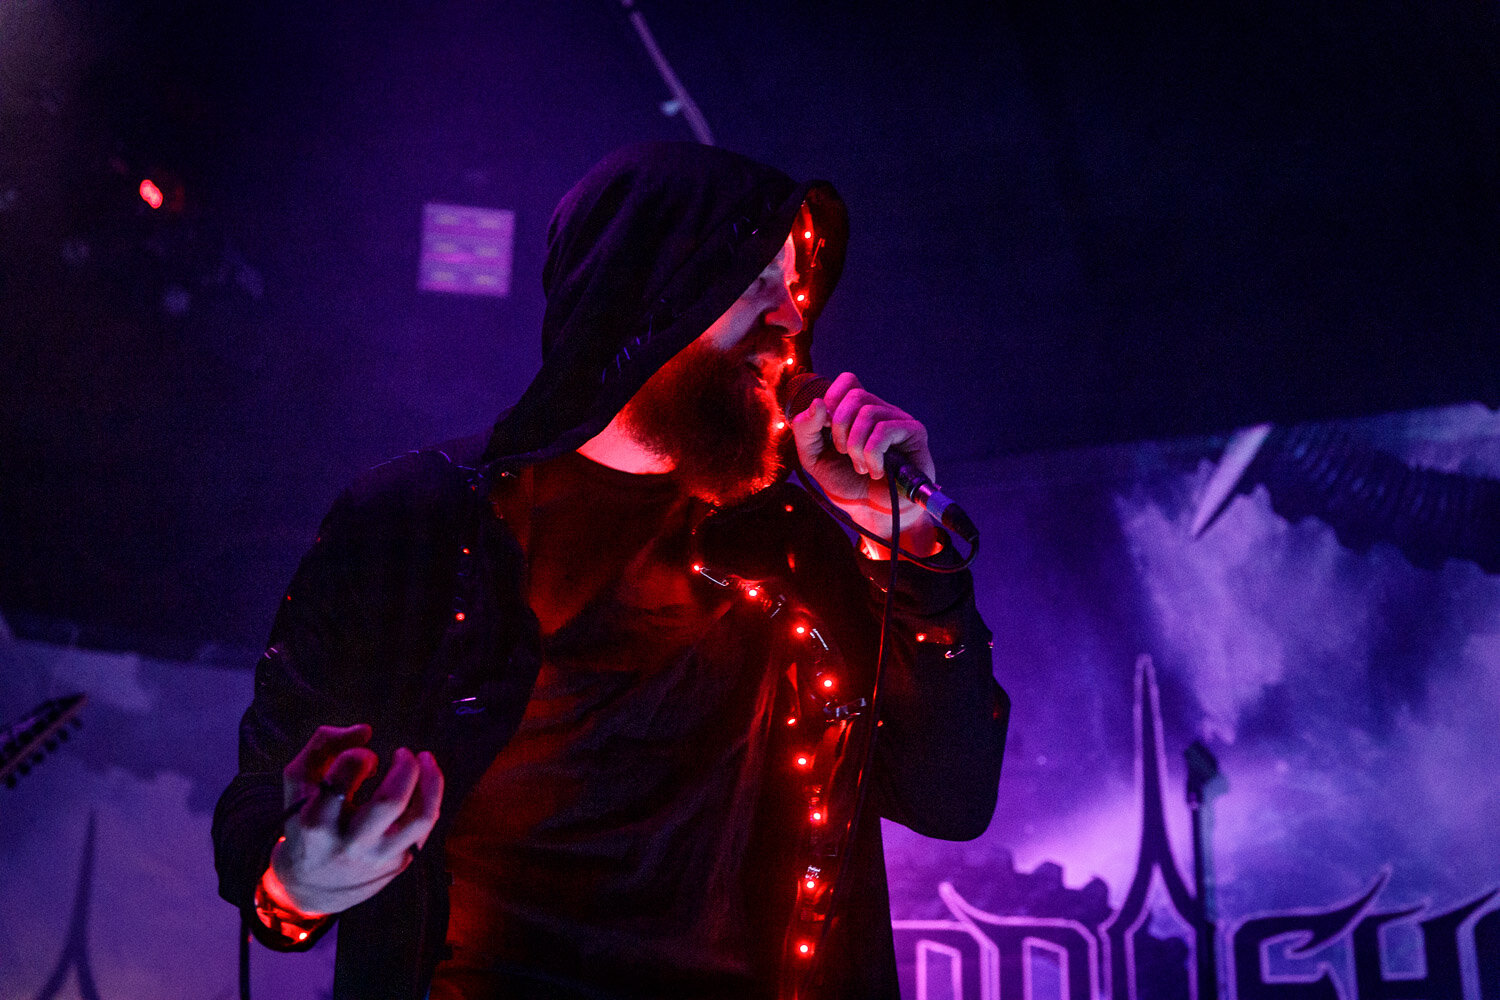 BruteAllies at Rebellion in Manchester on February 16th 2020